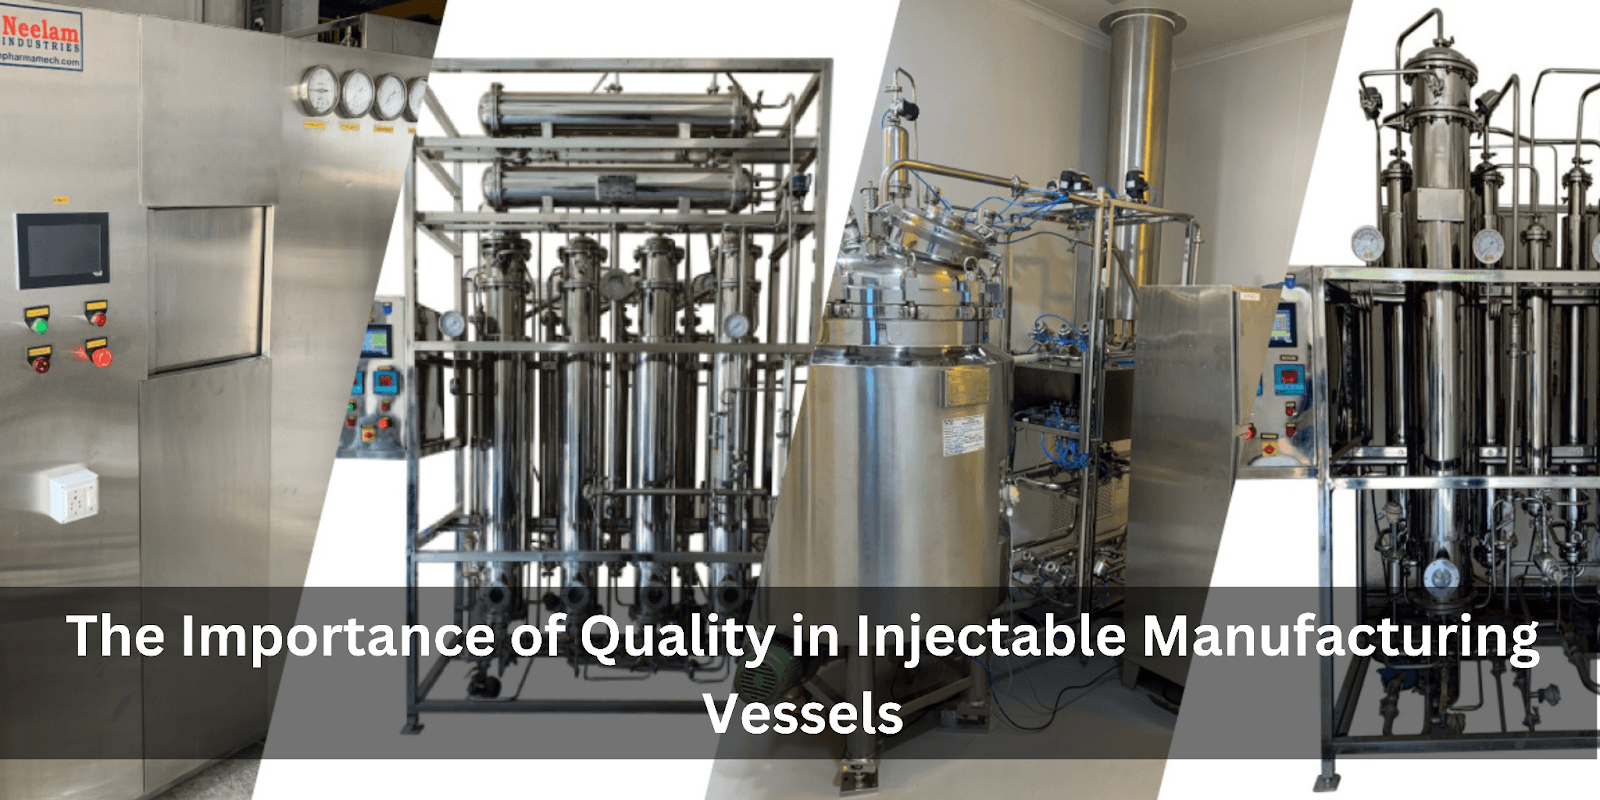 injectable manufacturing vessels